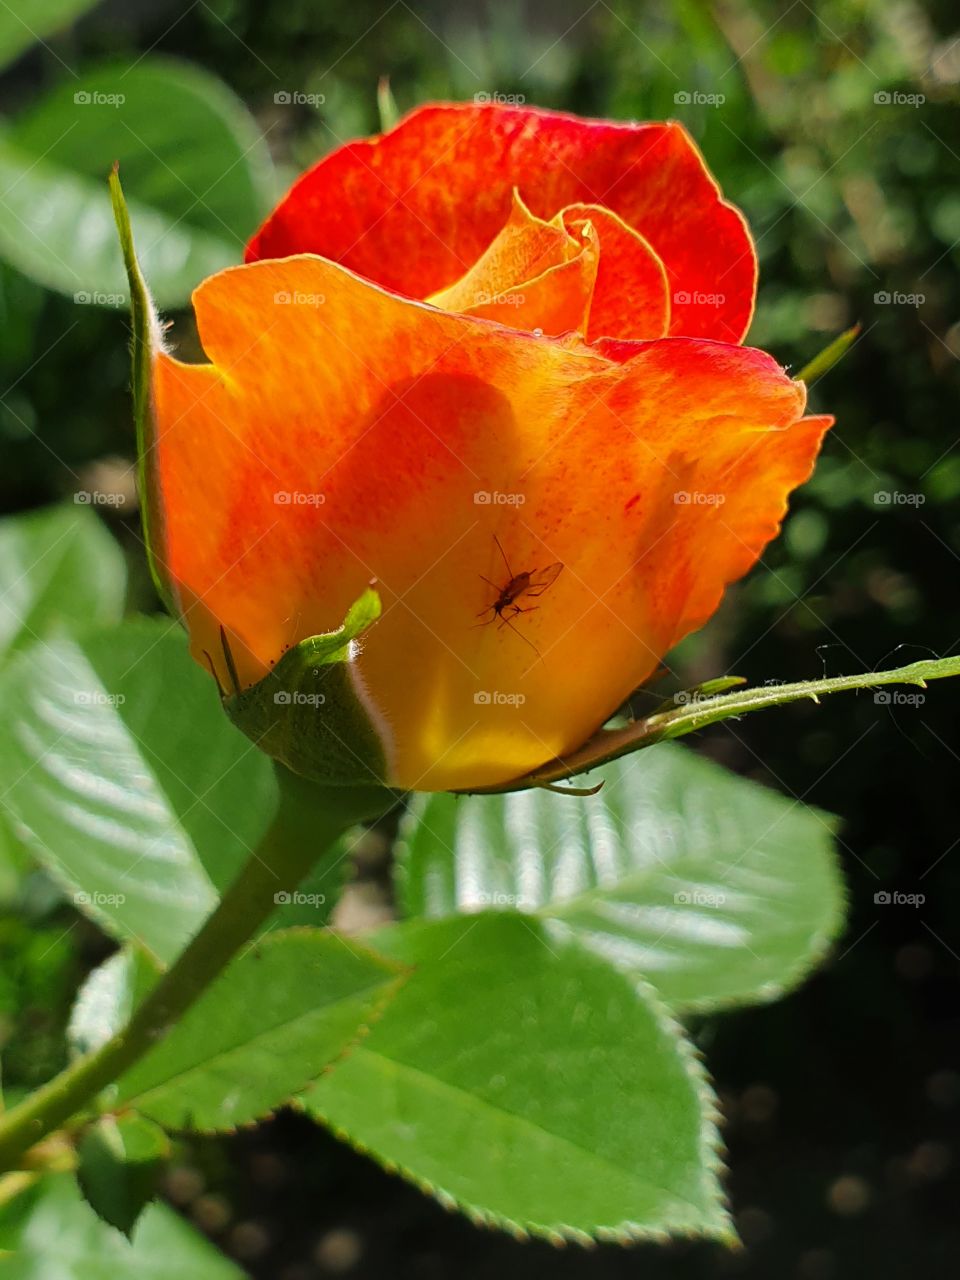 bright yellow and red rose with green leaves and a bug in the garden